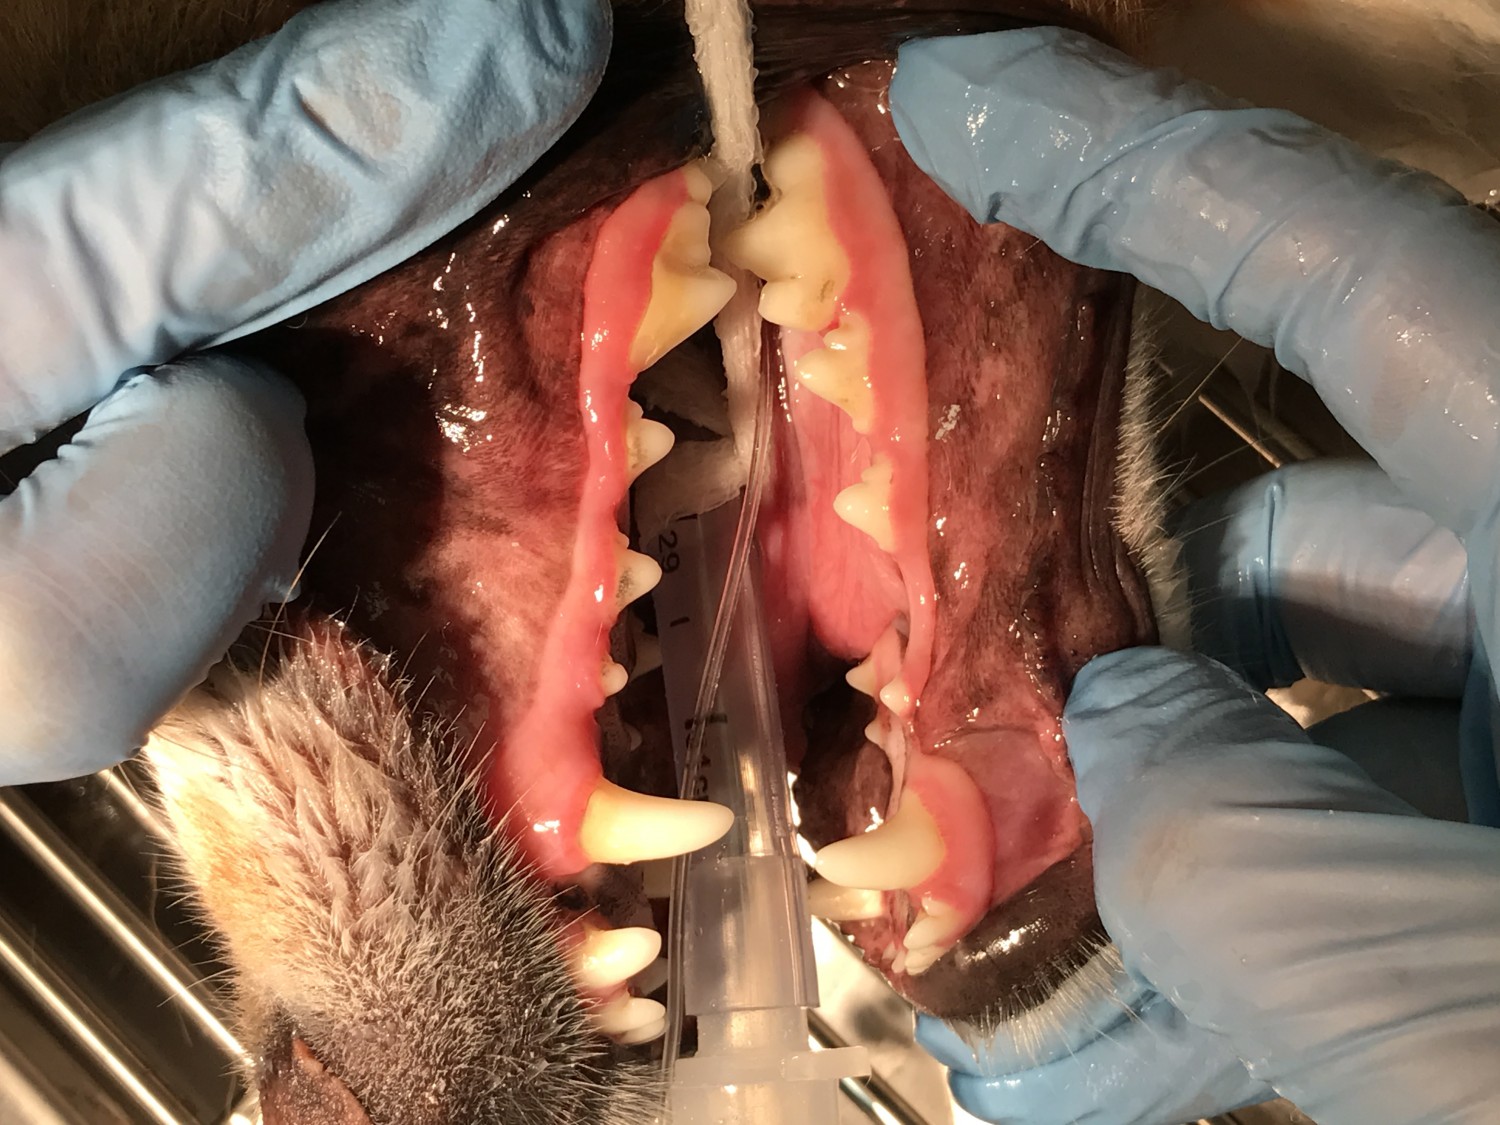 Periodontal Disease and Gingivitis Before Dental Treatment  - even though there is not much tartar on these teeth the gum  is red and inflammed at the tooth with most tartar. Gingivitis is present.